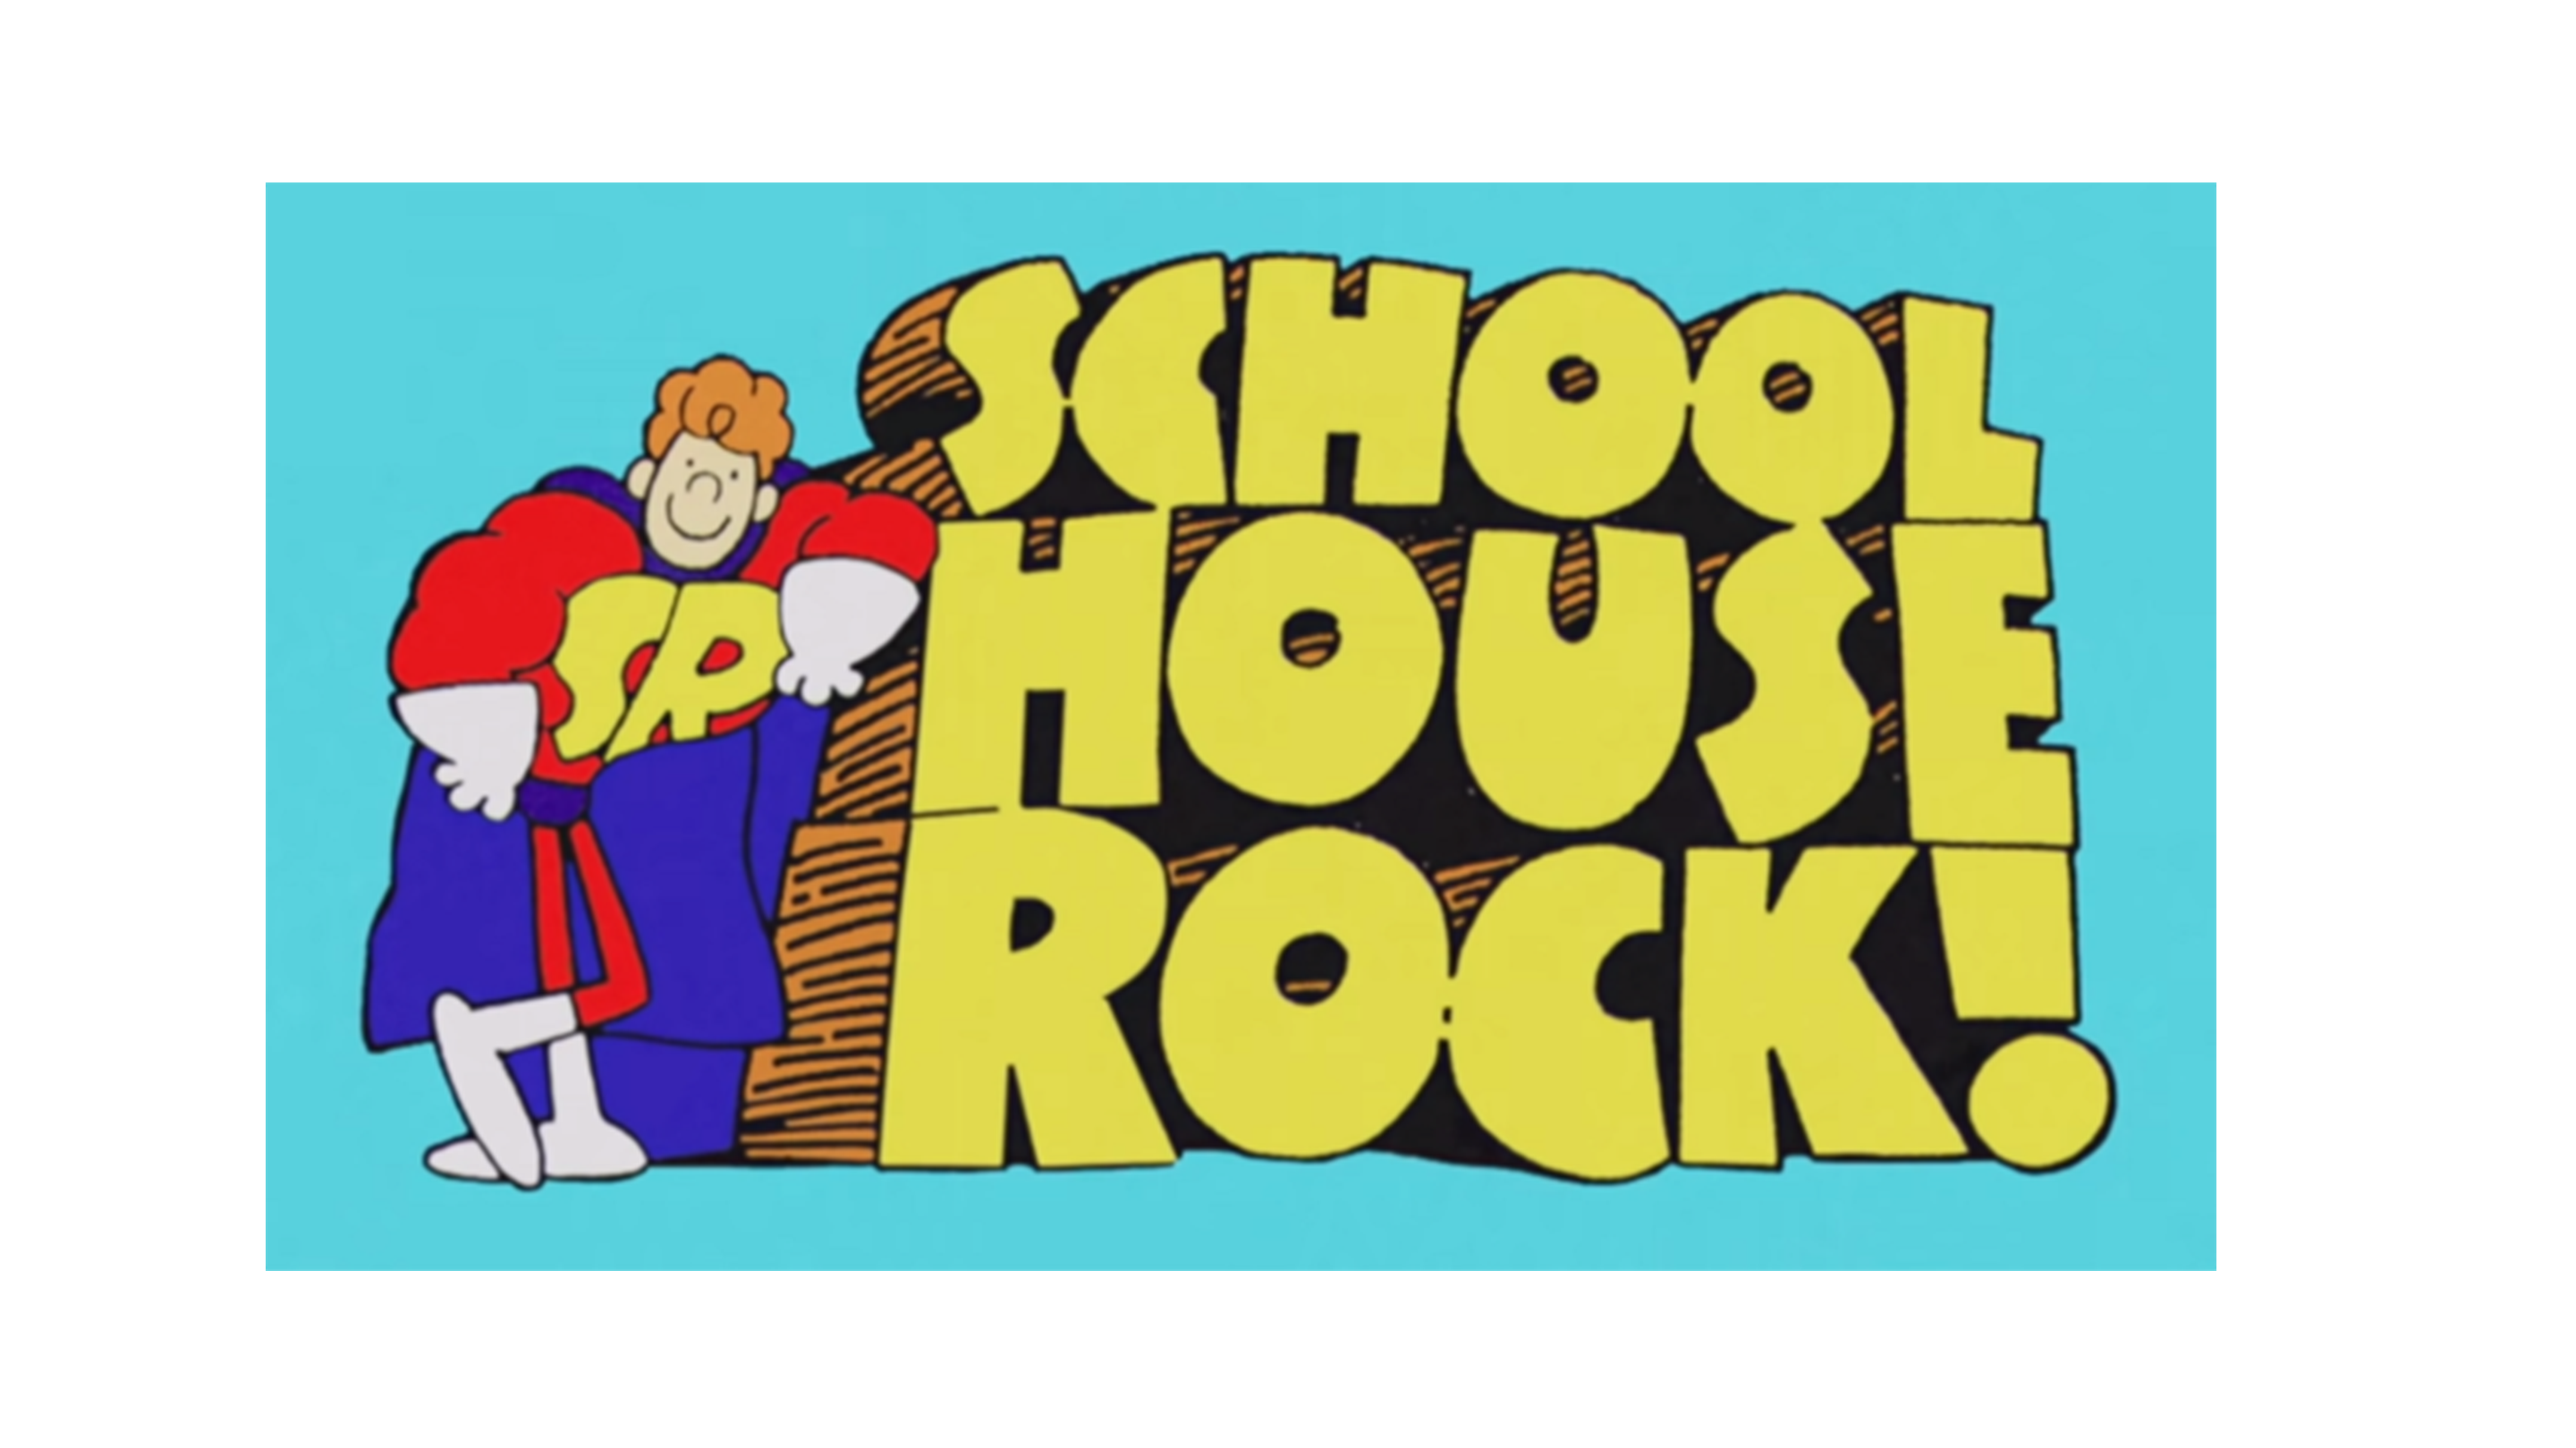 The enduring legacy of “Schoolhouse Rock!”.